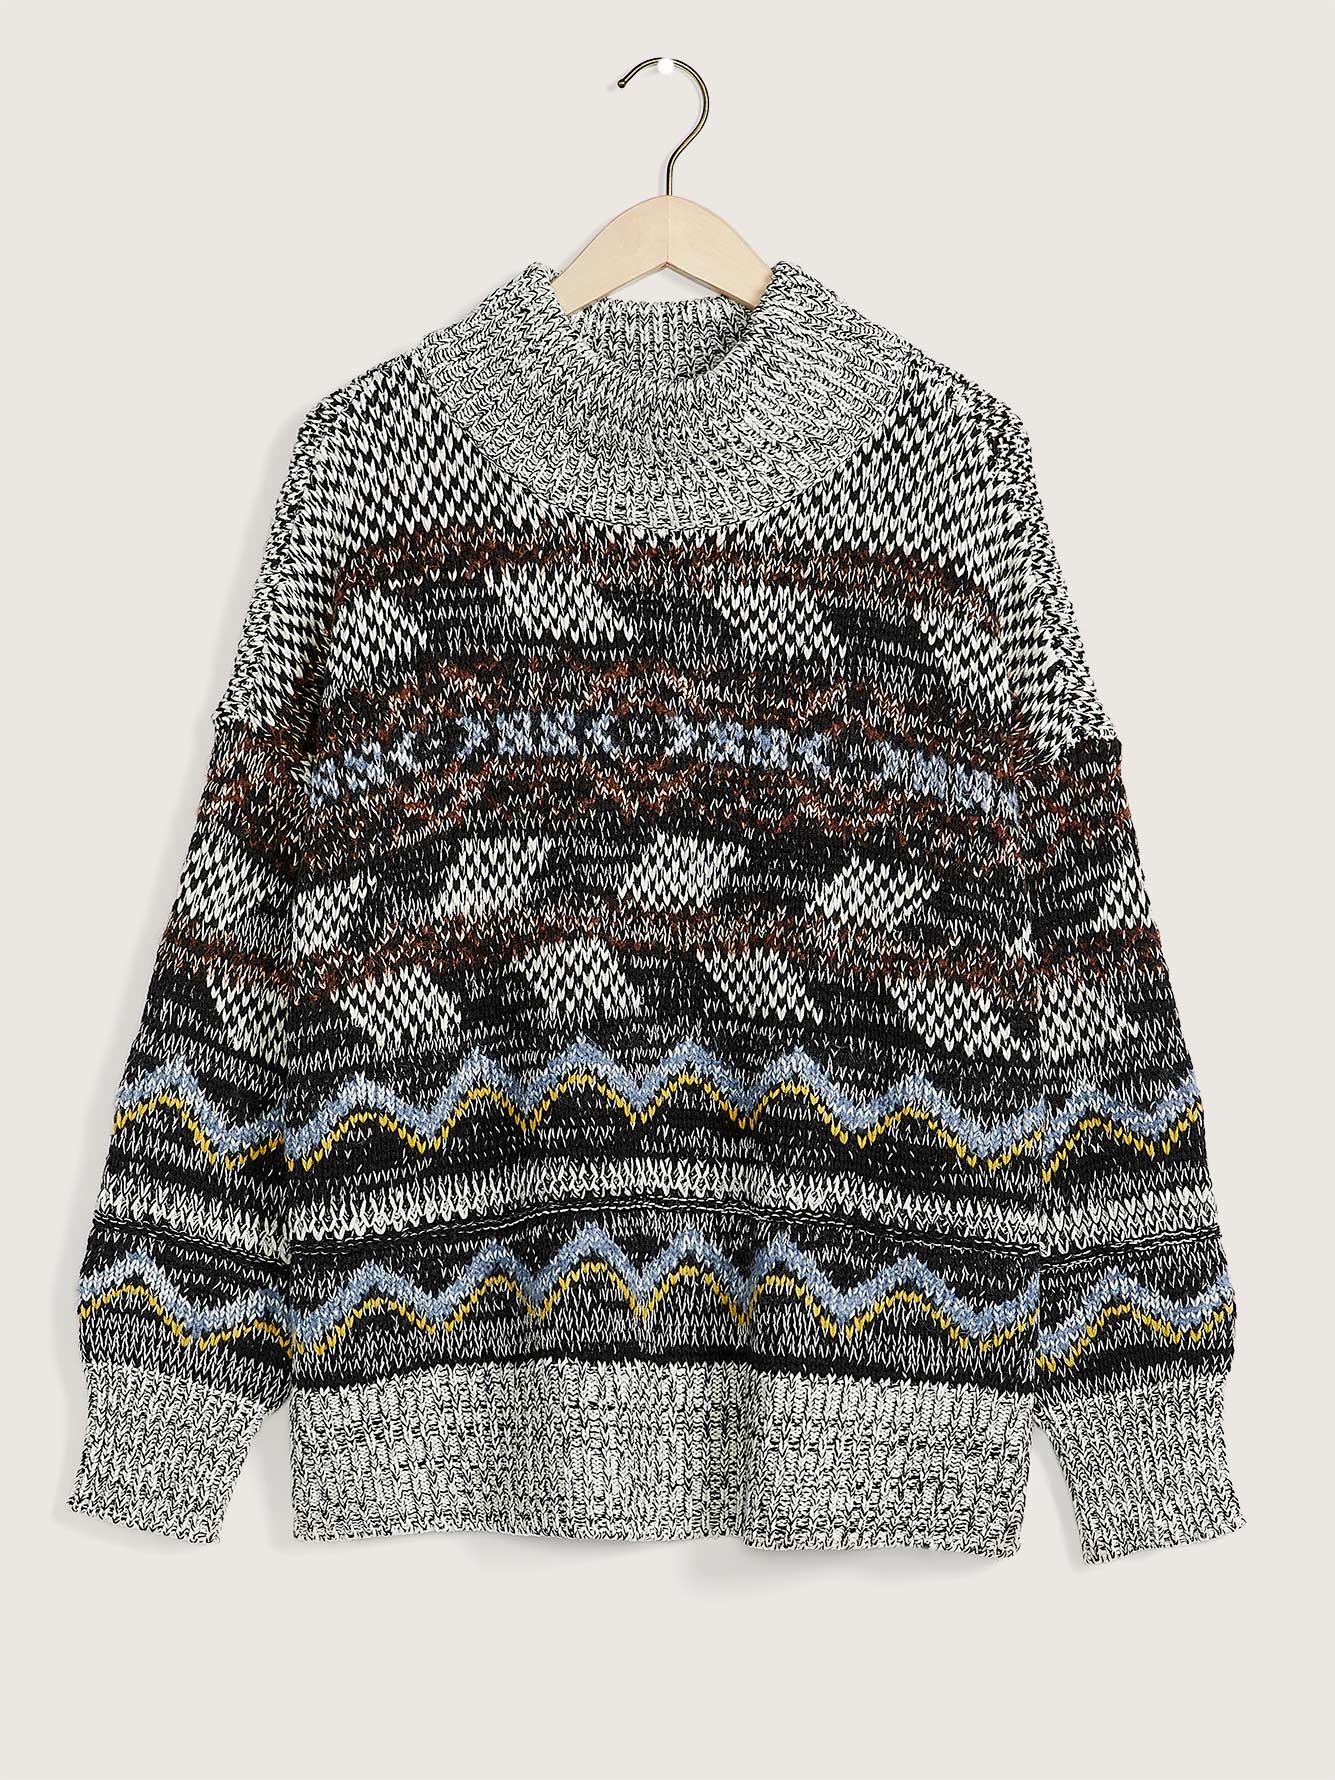 All-Over Jacquard Sweater with Wide Funnel Neck | Penningtons